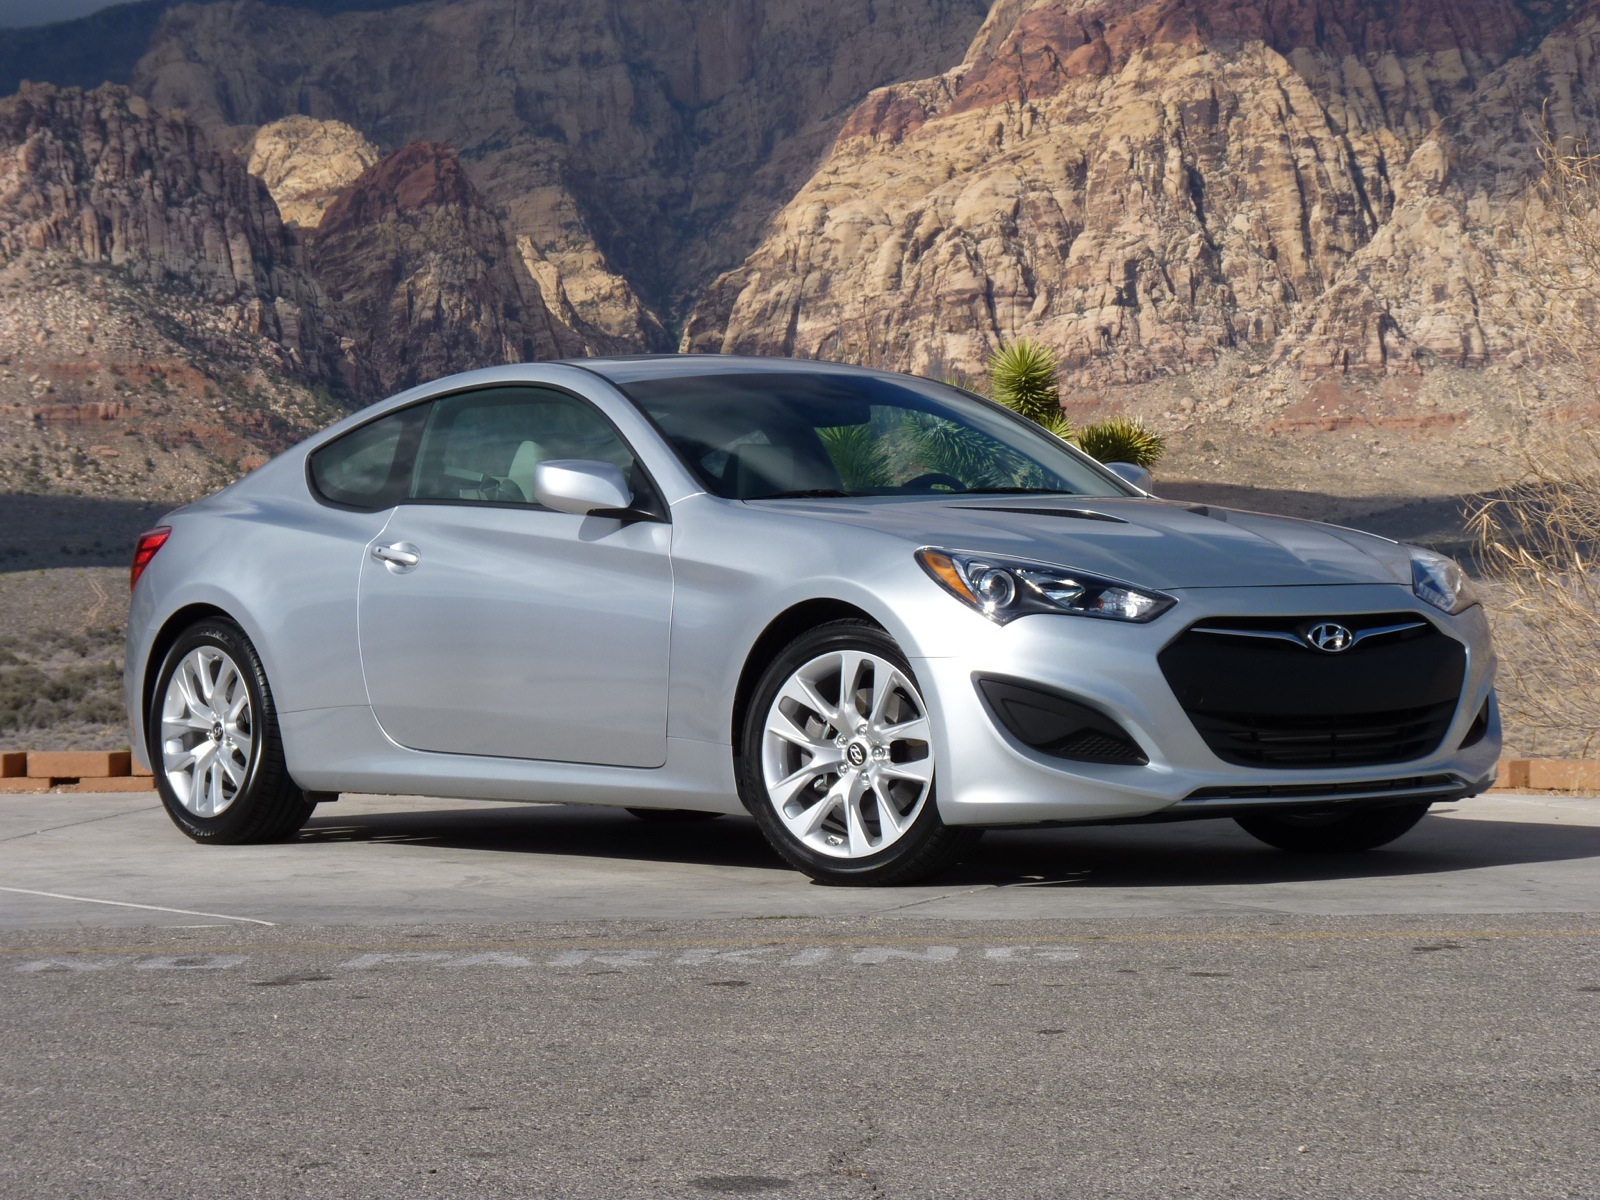 2013 Hyundai Genesis Coupe: First Drive (Page 2)